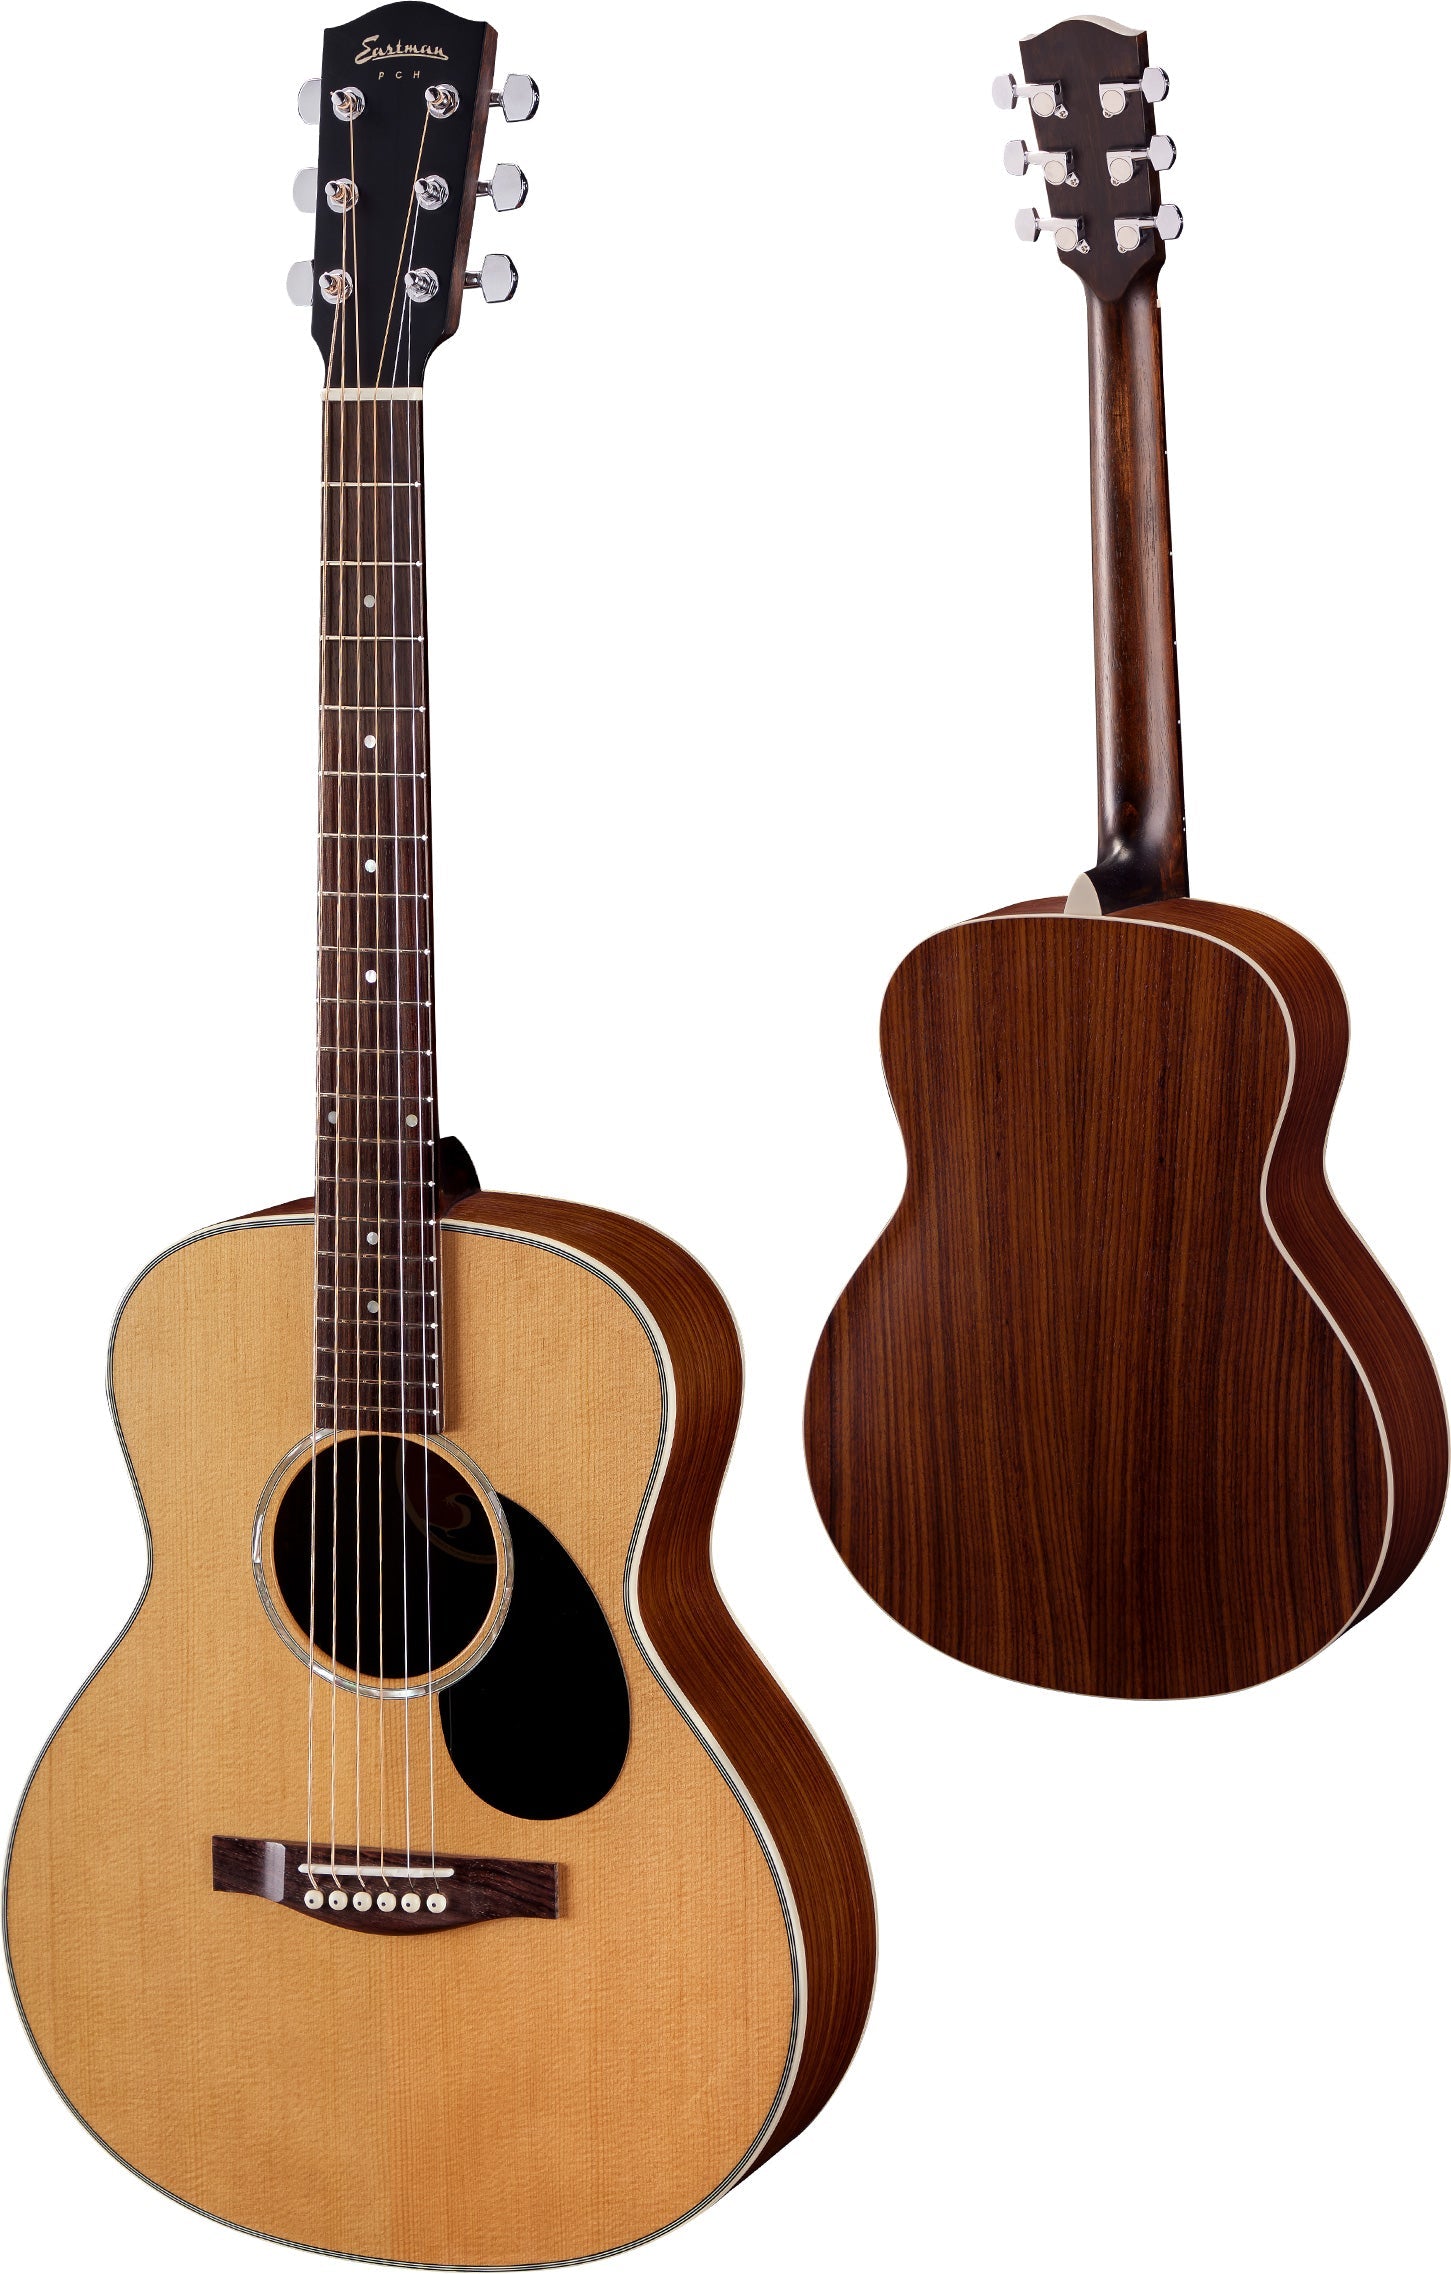 Eastman PCH2-TG, natural, Acoustic guitar, Electro Acoustic Guitar for sale at Richards Guitars.